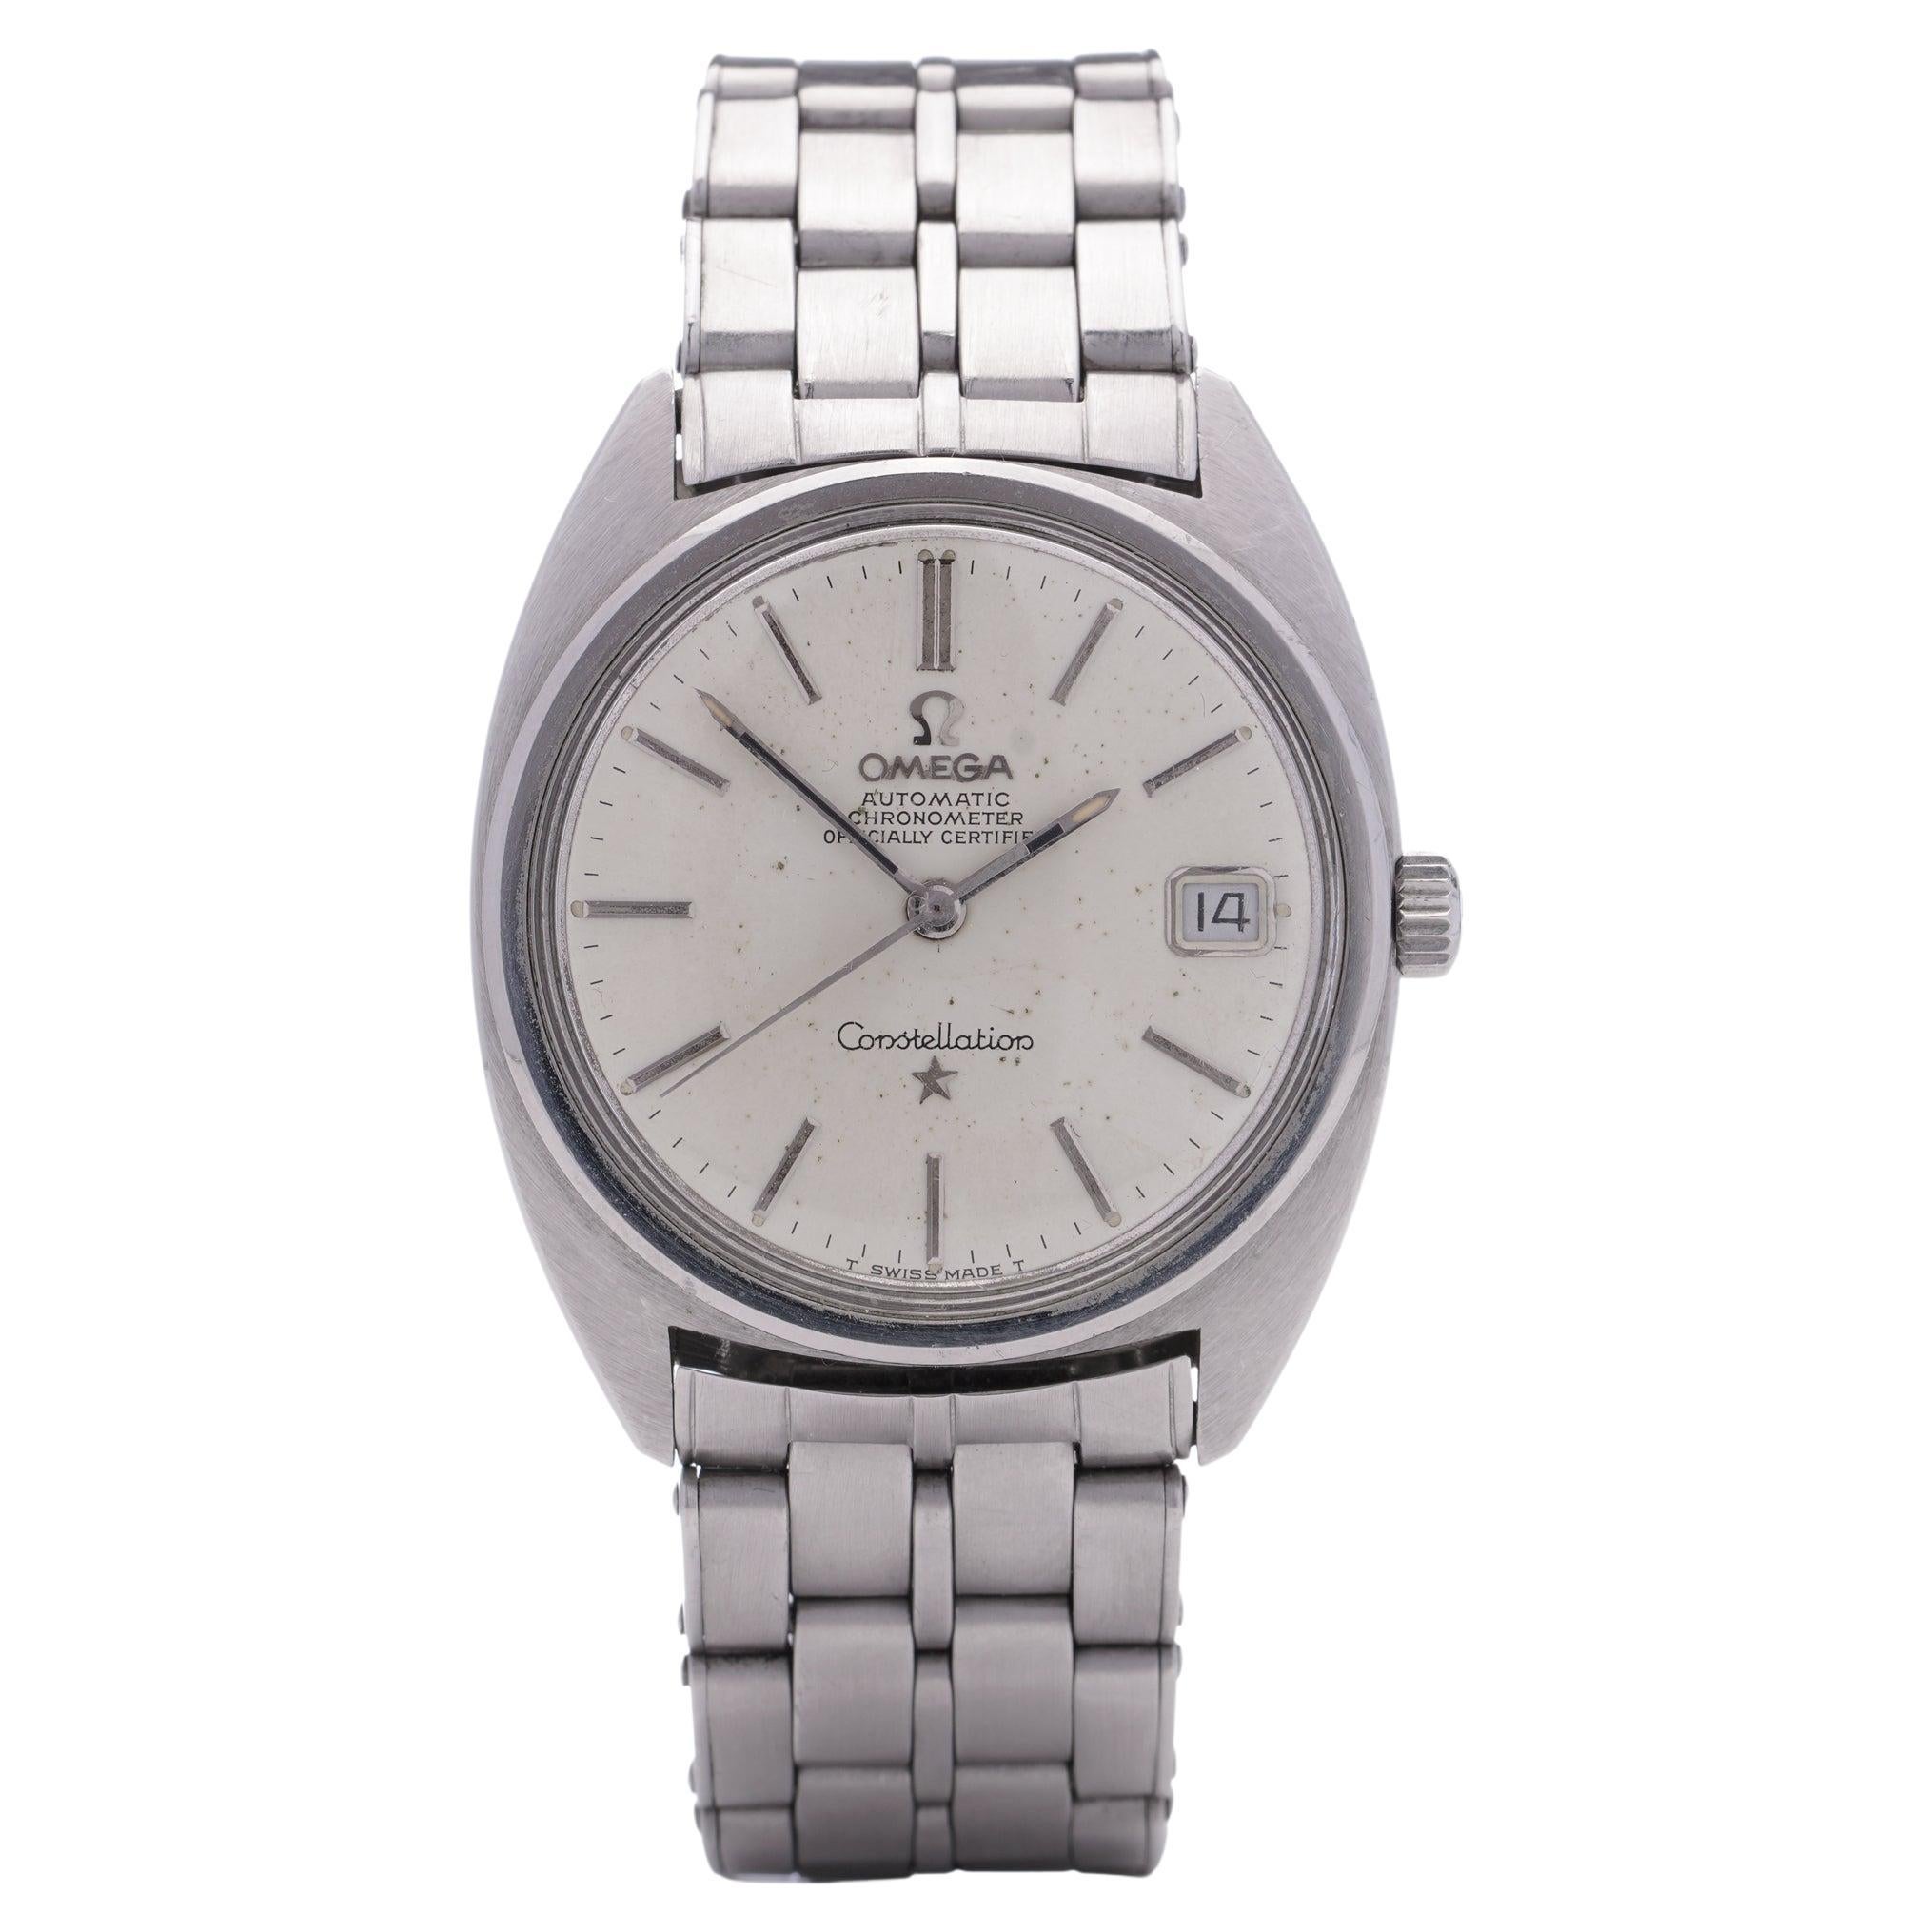 Omega Constellation Chronometer Automatic Vintage Stainless Steel Watch